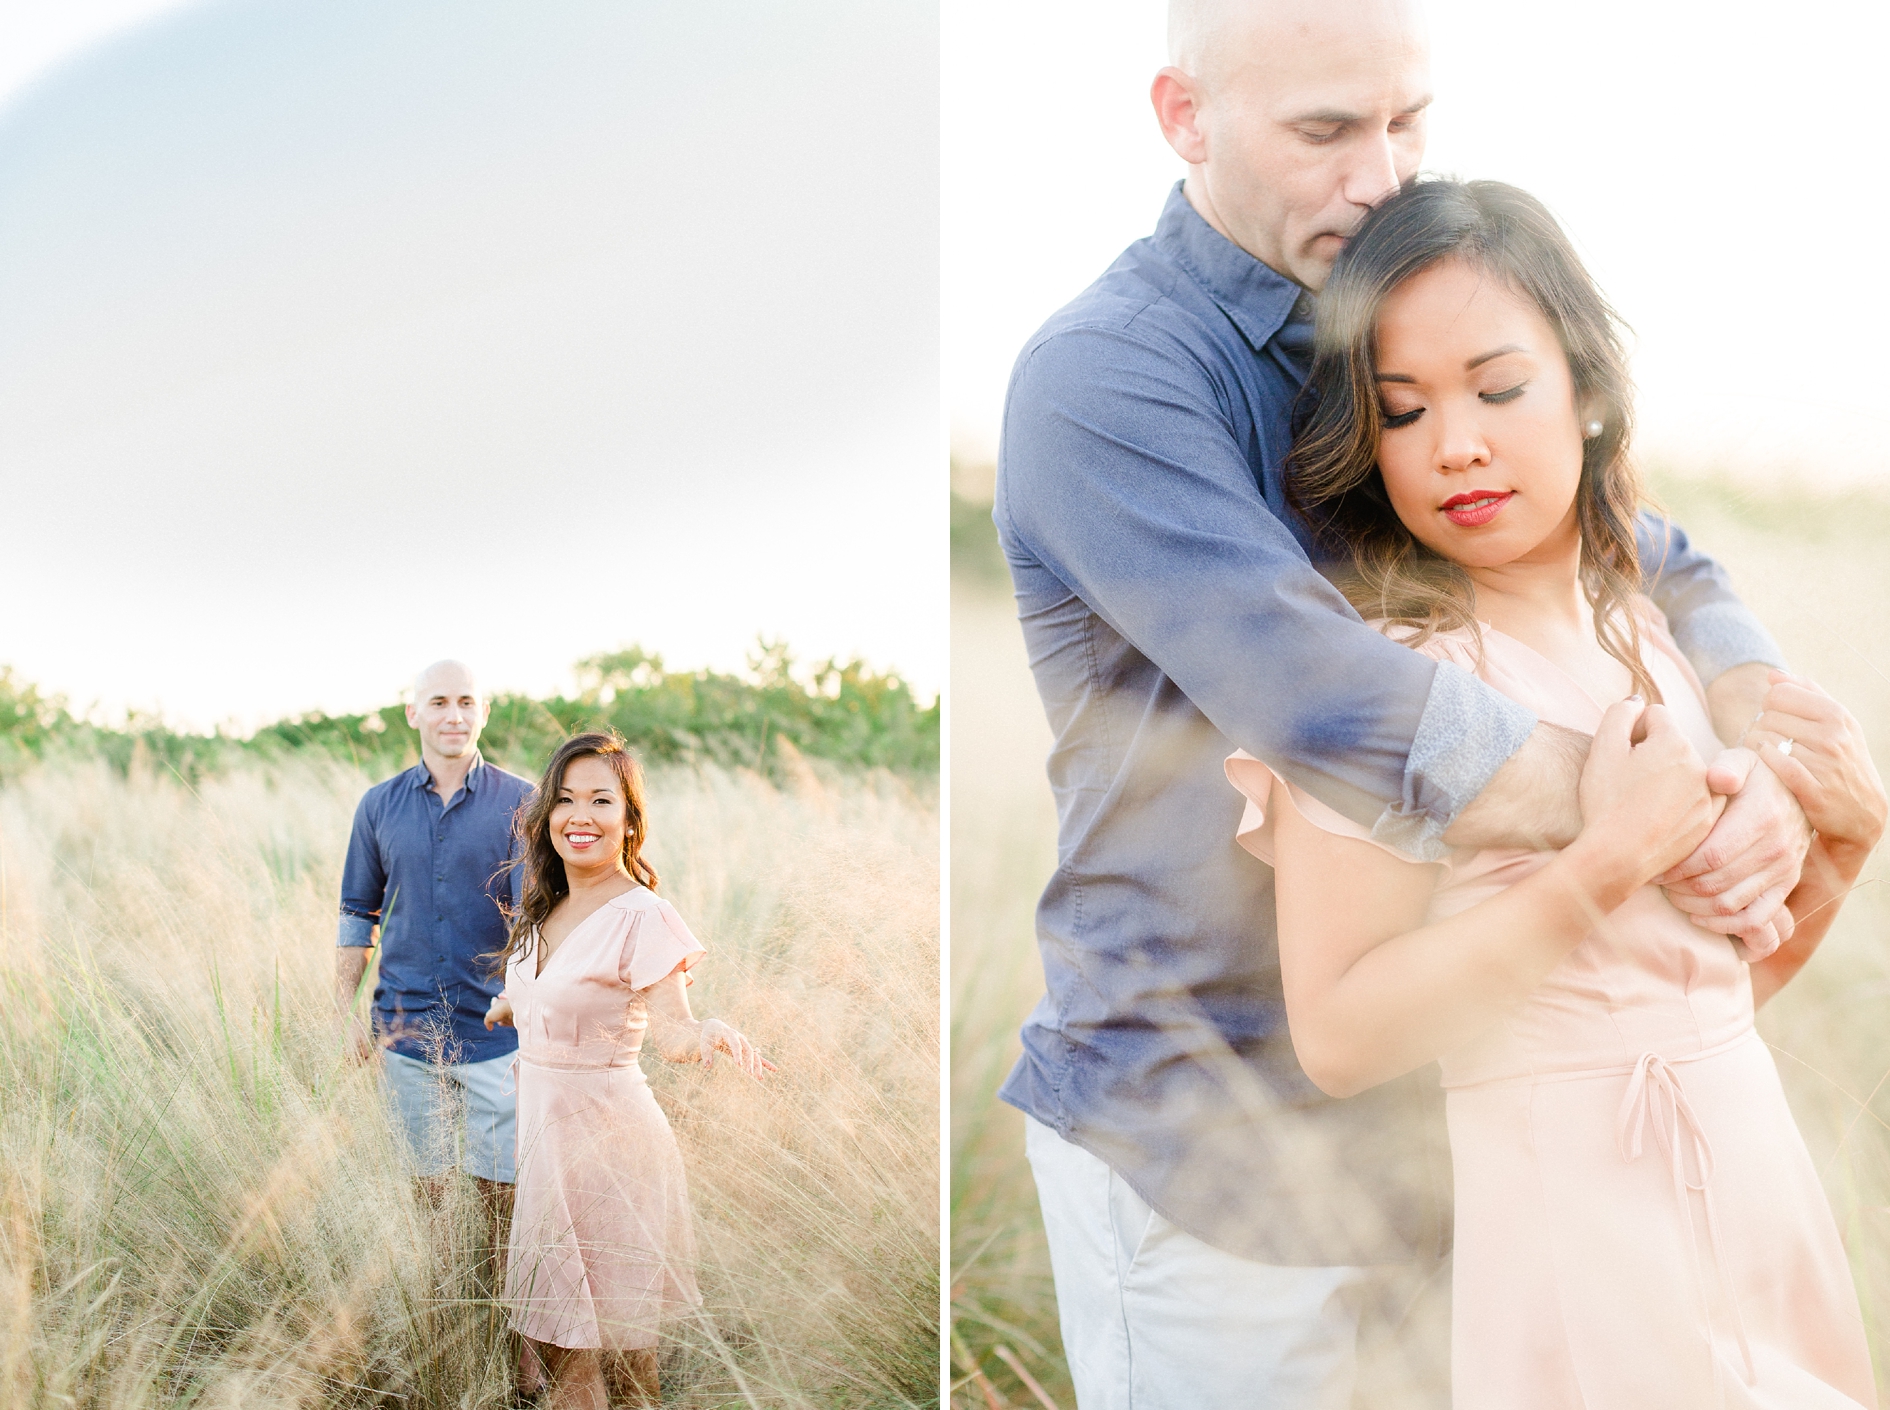 Tampa Engagement Photography | © Ailyn LaTorre Photography 2017